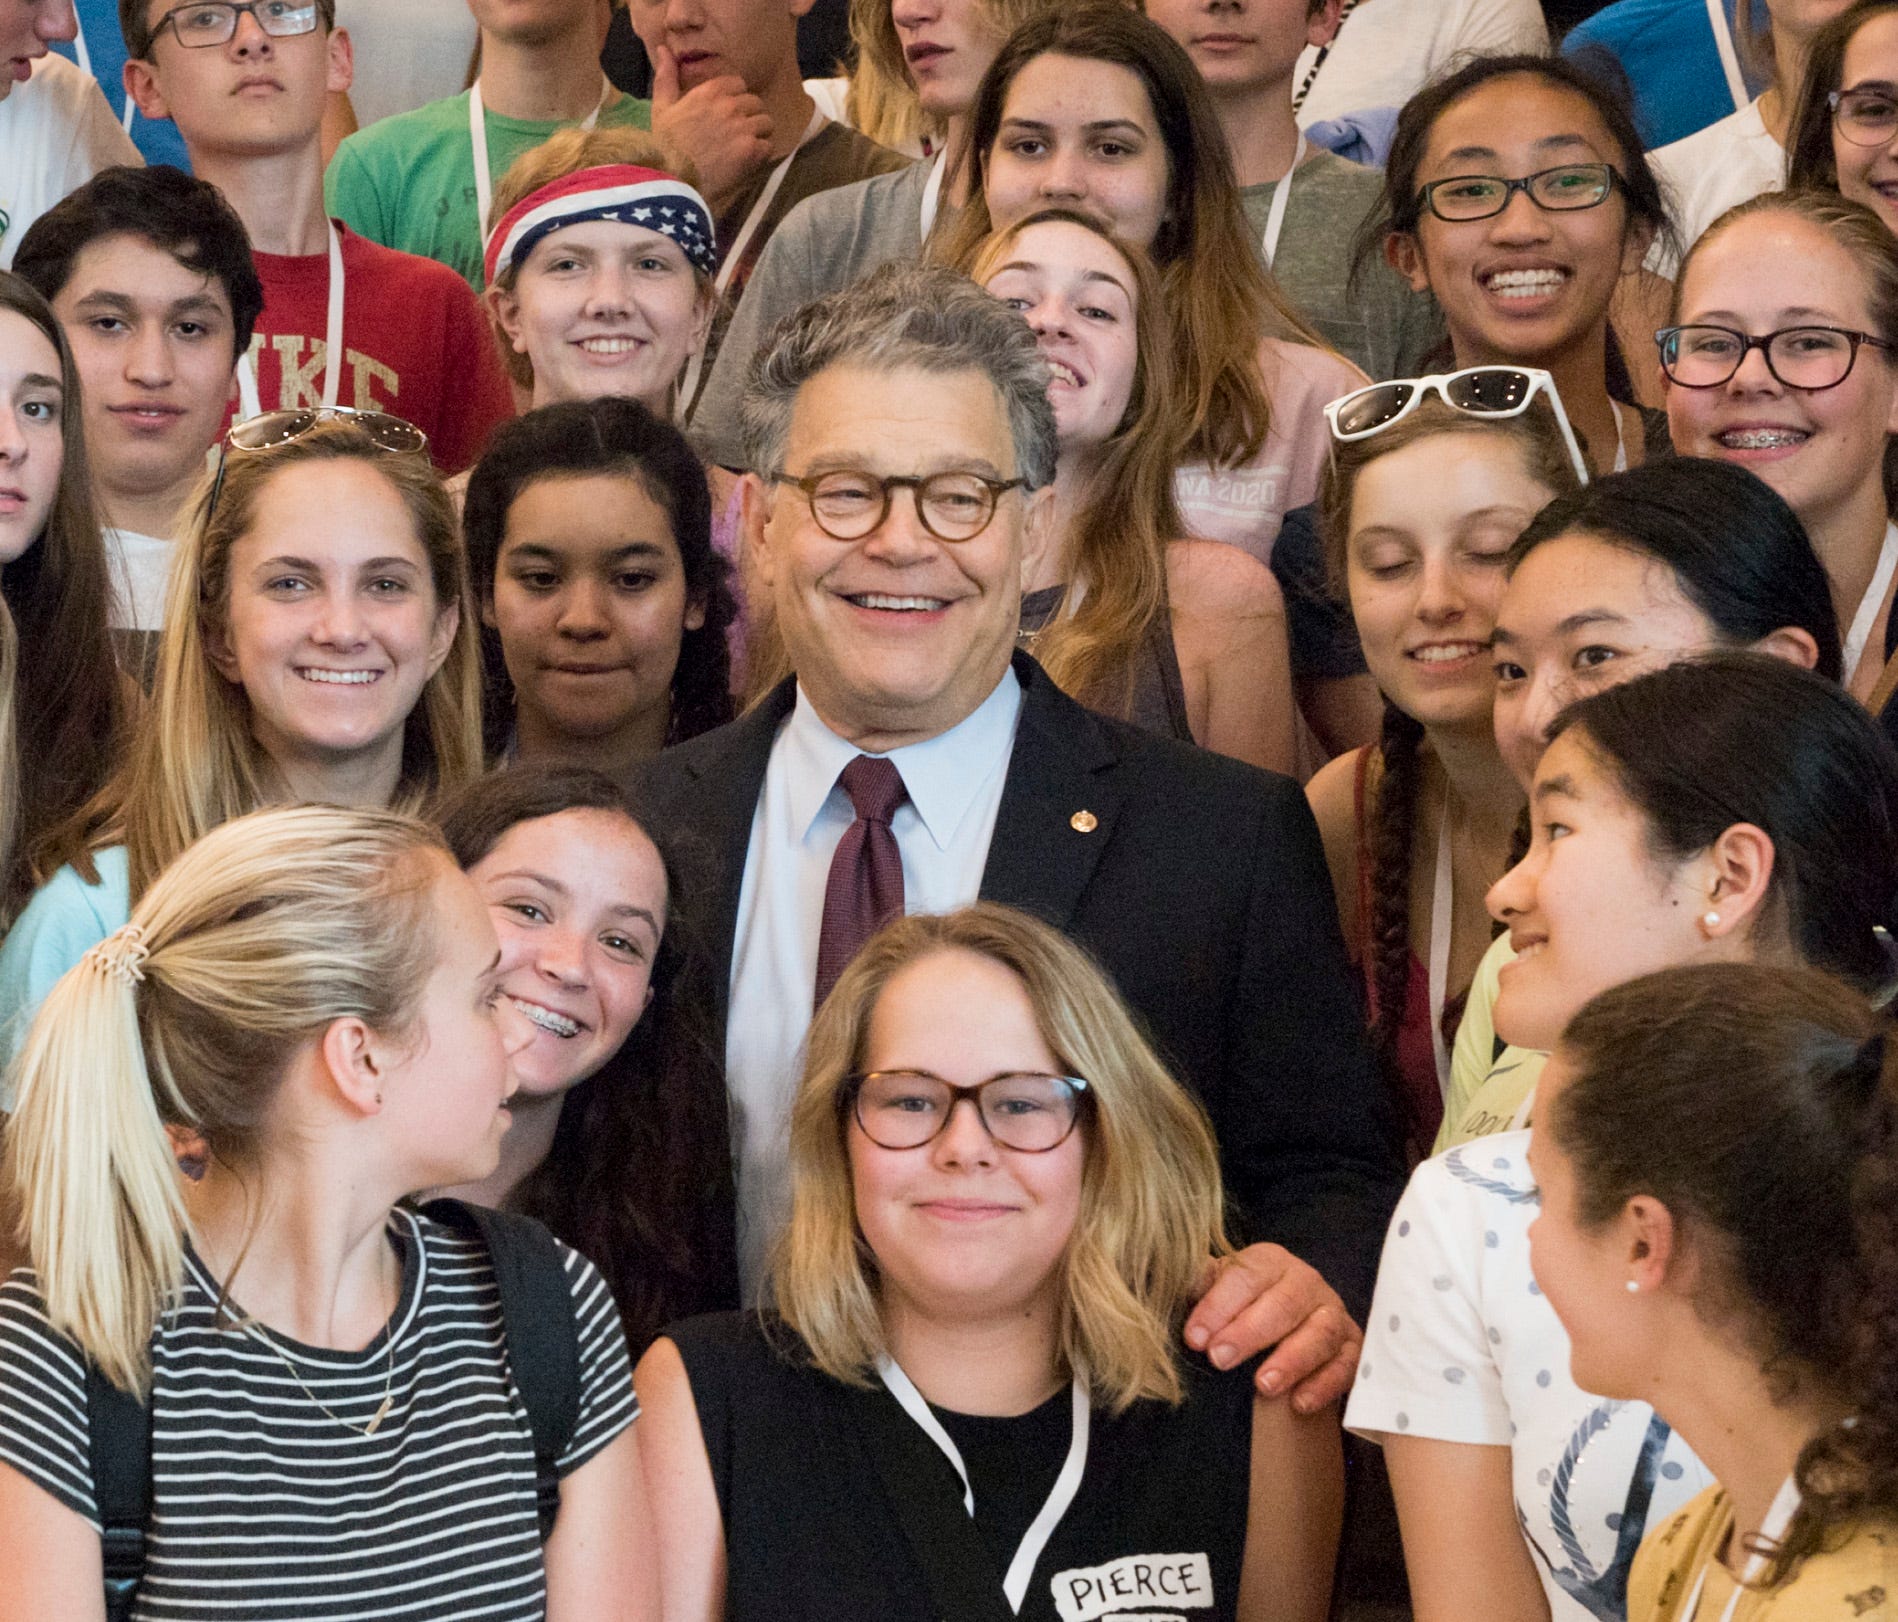 Minnesota Sen. Al Franken poses with visiting students from Valley View Middle School, in Edina, Minn., on Capitol Hill on May 18, 2017.